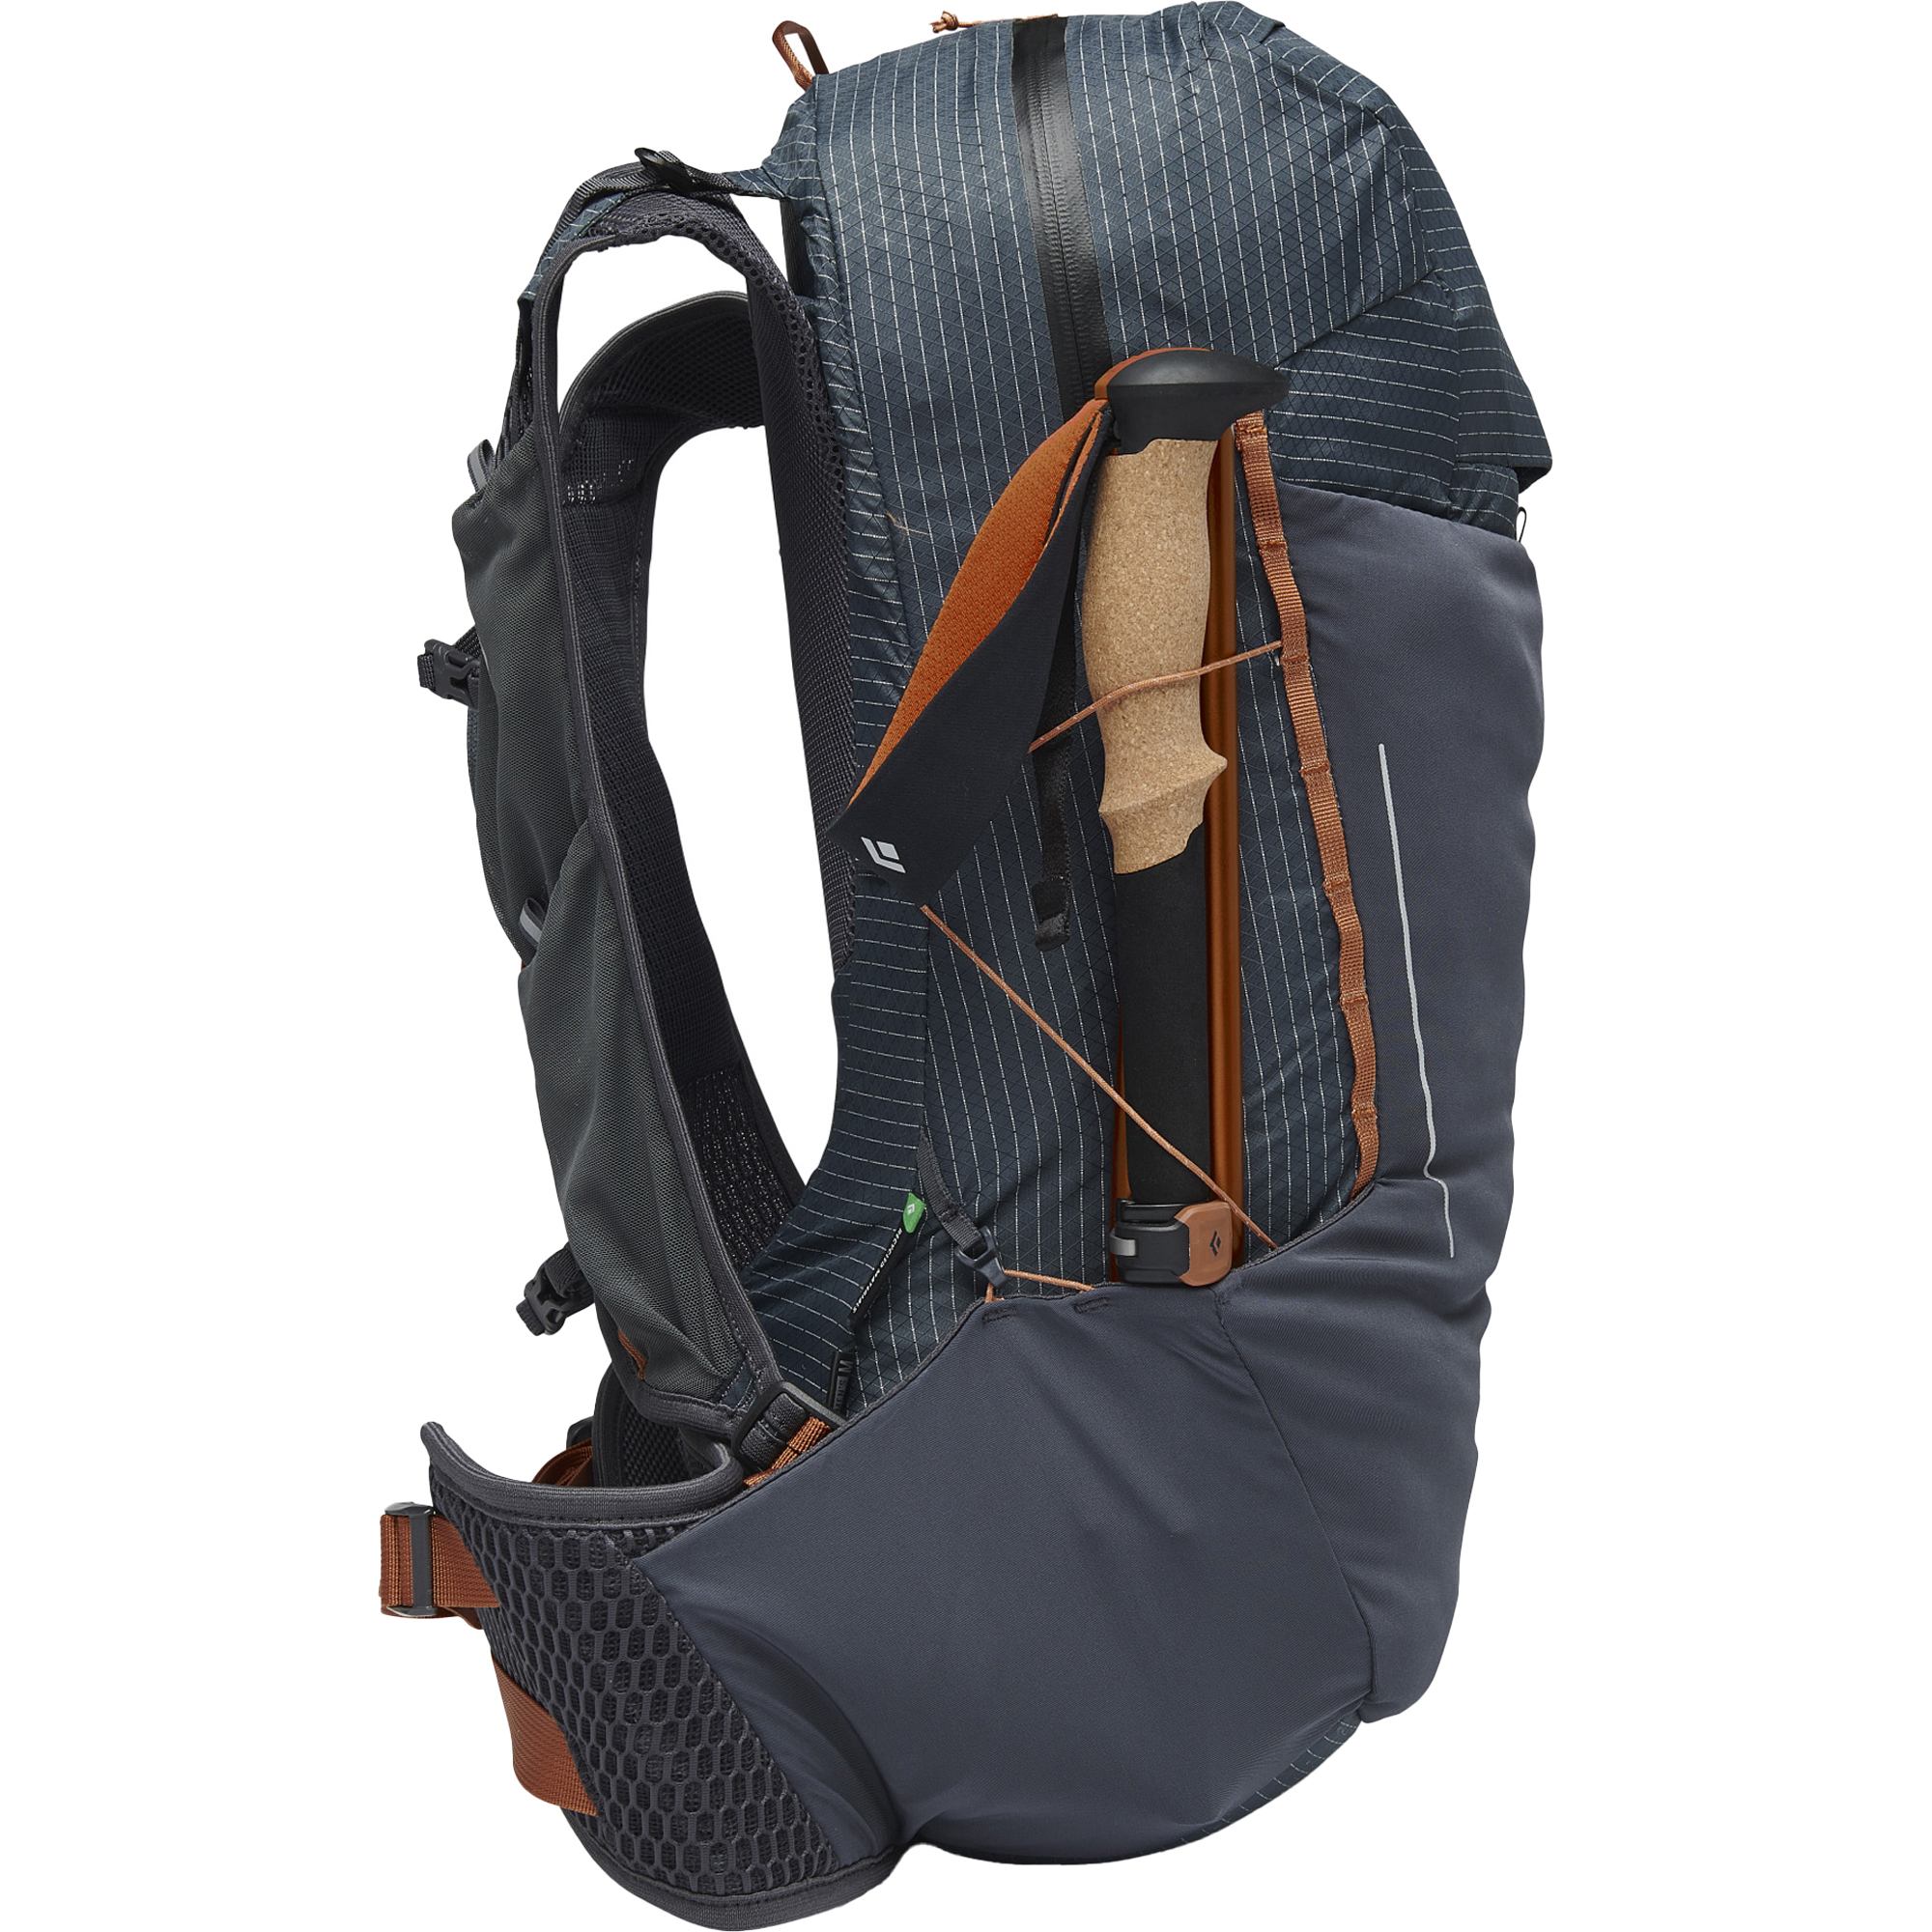 Black Diamond Pursuit 30 Hiking Backpack/Day Pack